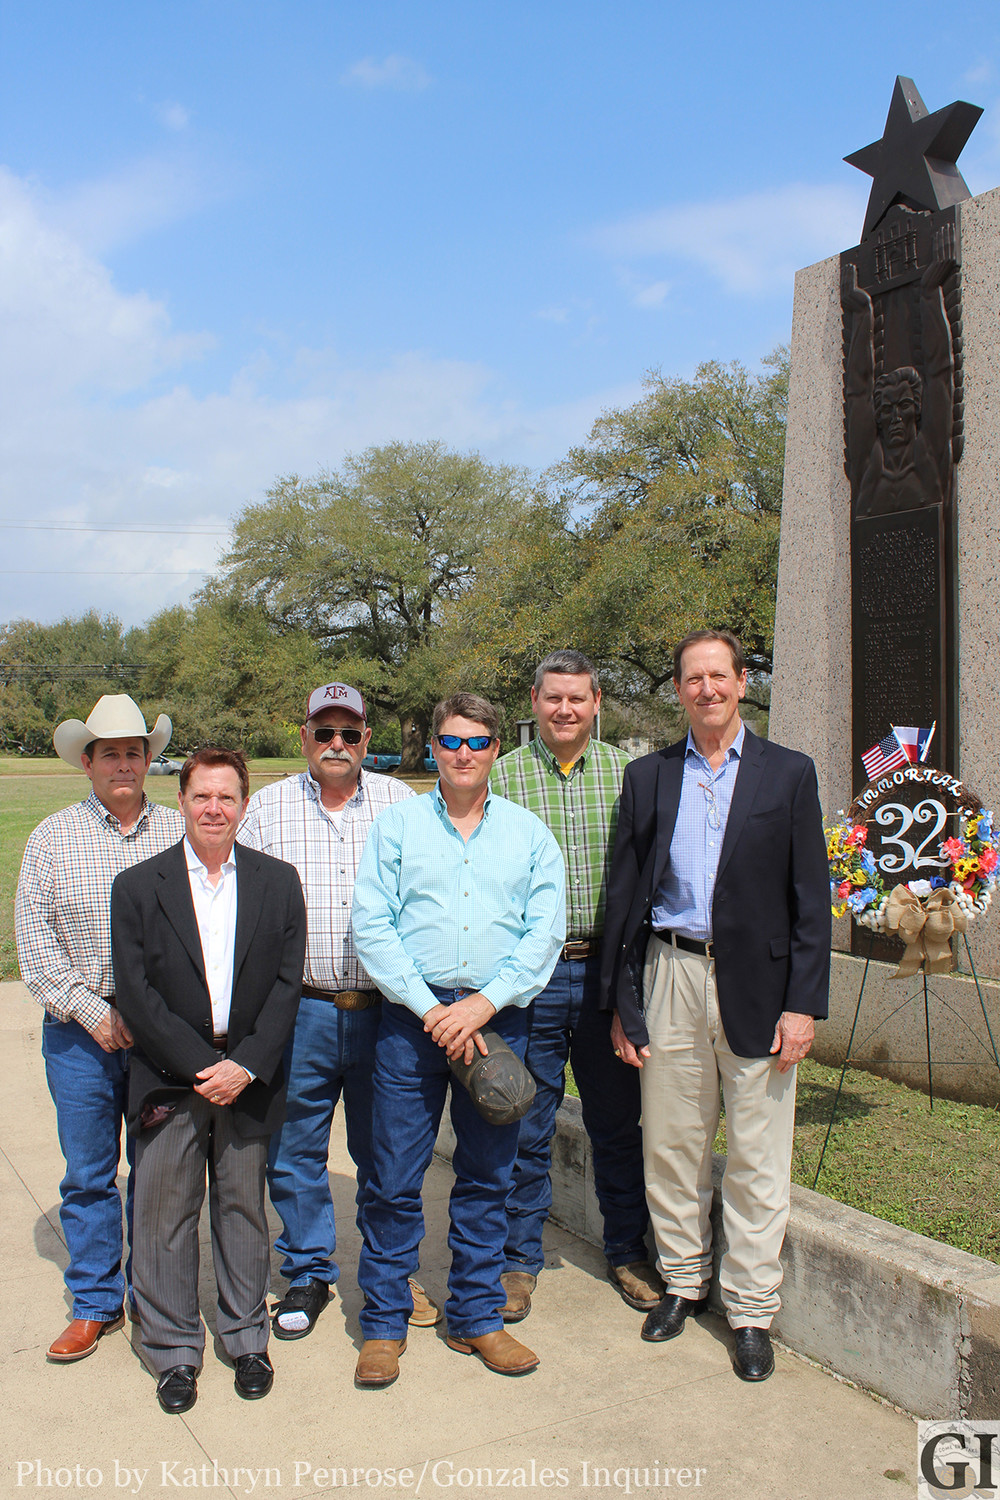 Members of Sons of the Republic of Texas Chapter 29 laid a wreath at the foot of the Immortal 32 monument at Gonzales Memorial Museum on Tuesday, Feb. 27, commemorating the departure of the Immortal 32 from Gonzales. Back Row (left to right): John Meador, Kenneth Fink and Brian Sample. Front row (left to right): Richard Croizer, Kirk Lubbock and Chapter President David Bird.